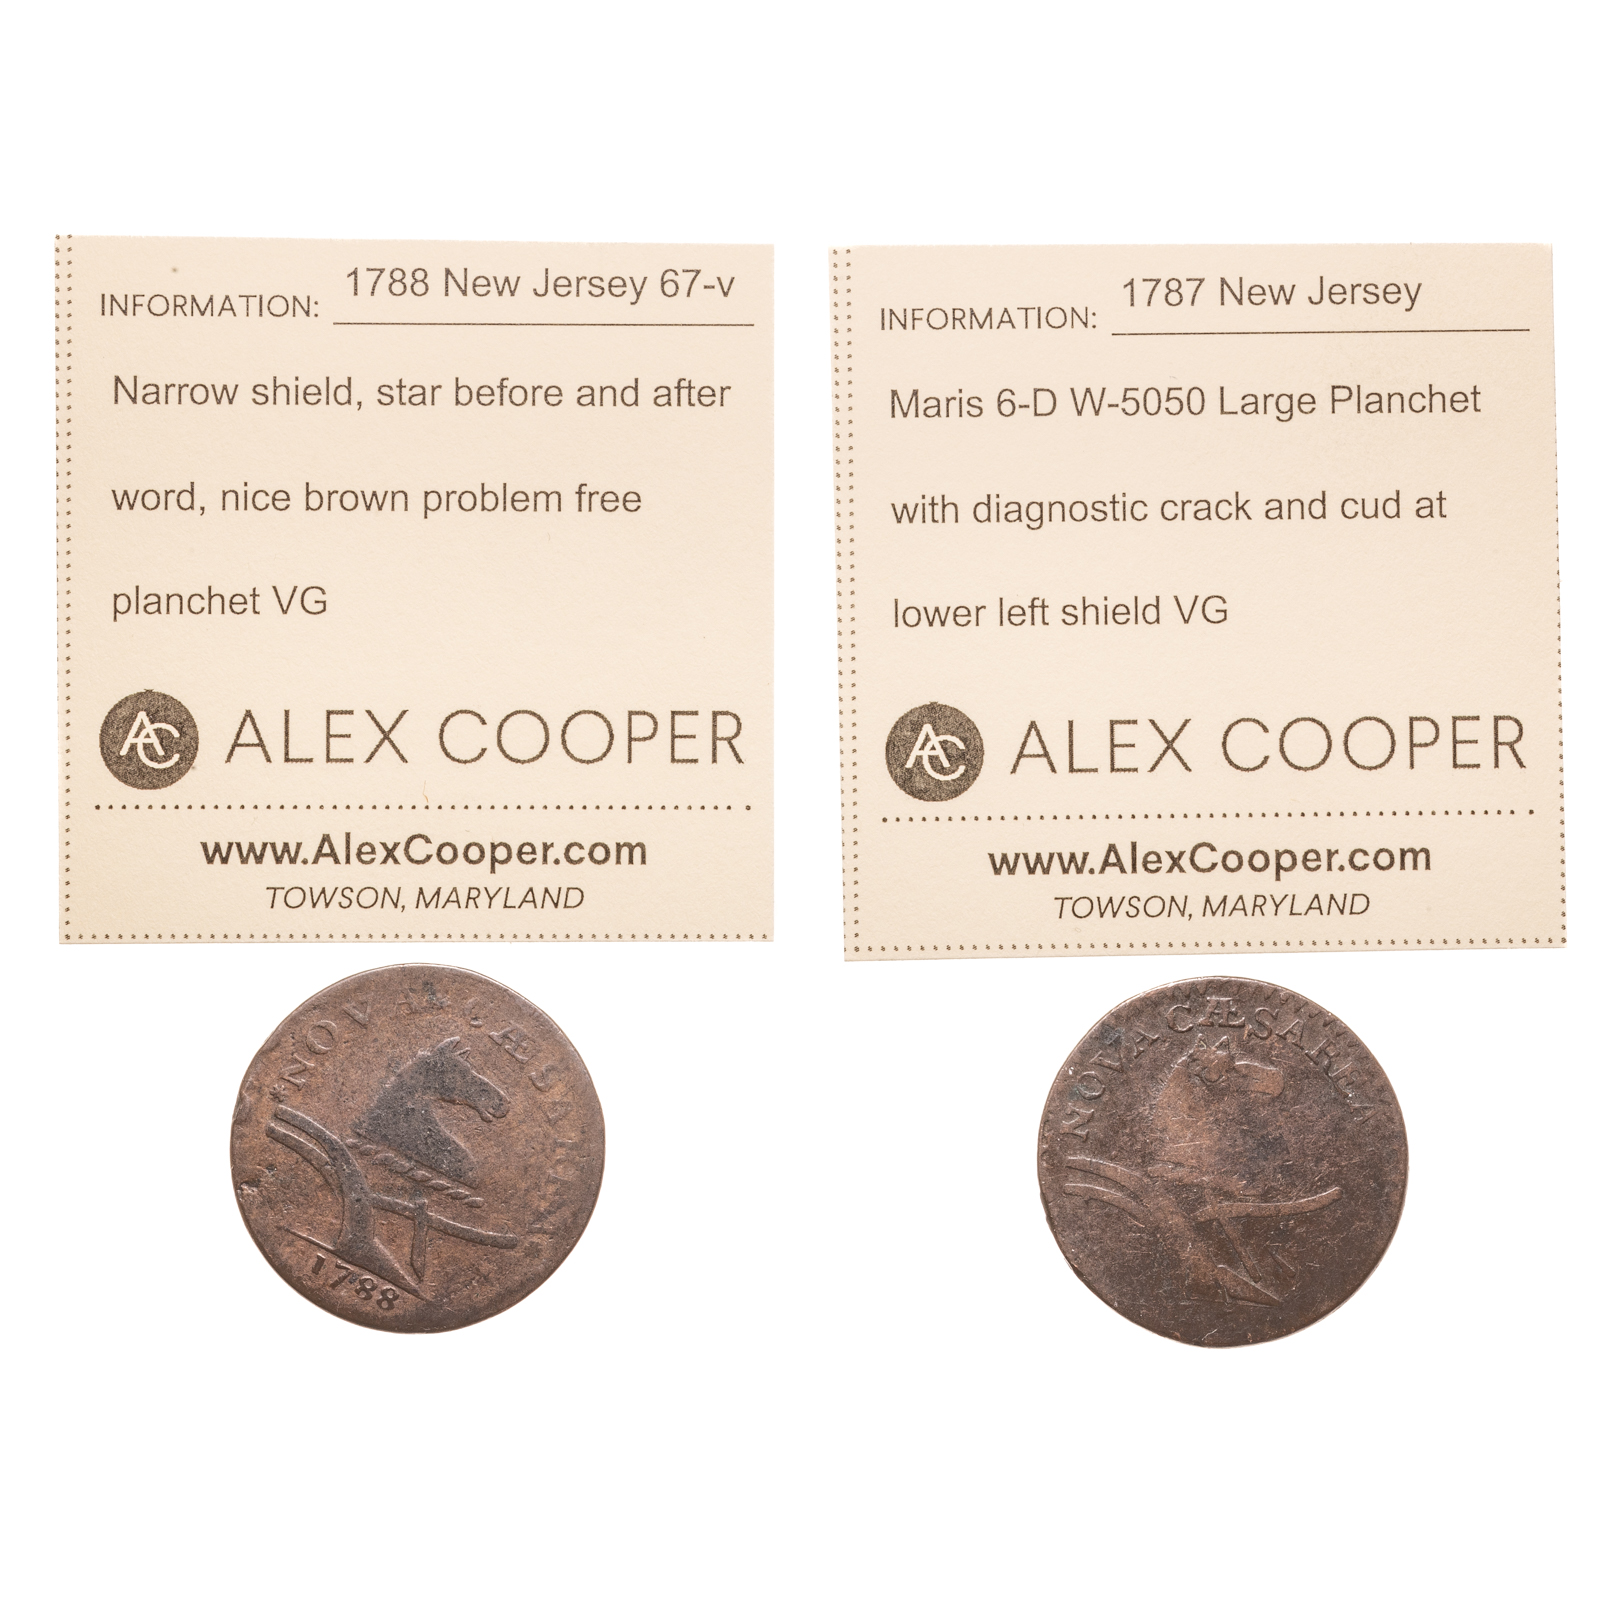 TWO NEW JERSEY COPPERS 1787 6-D